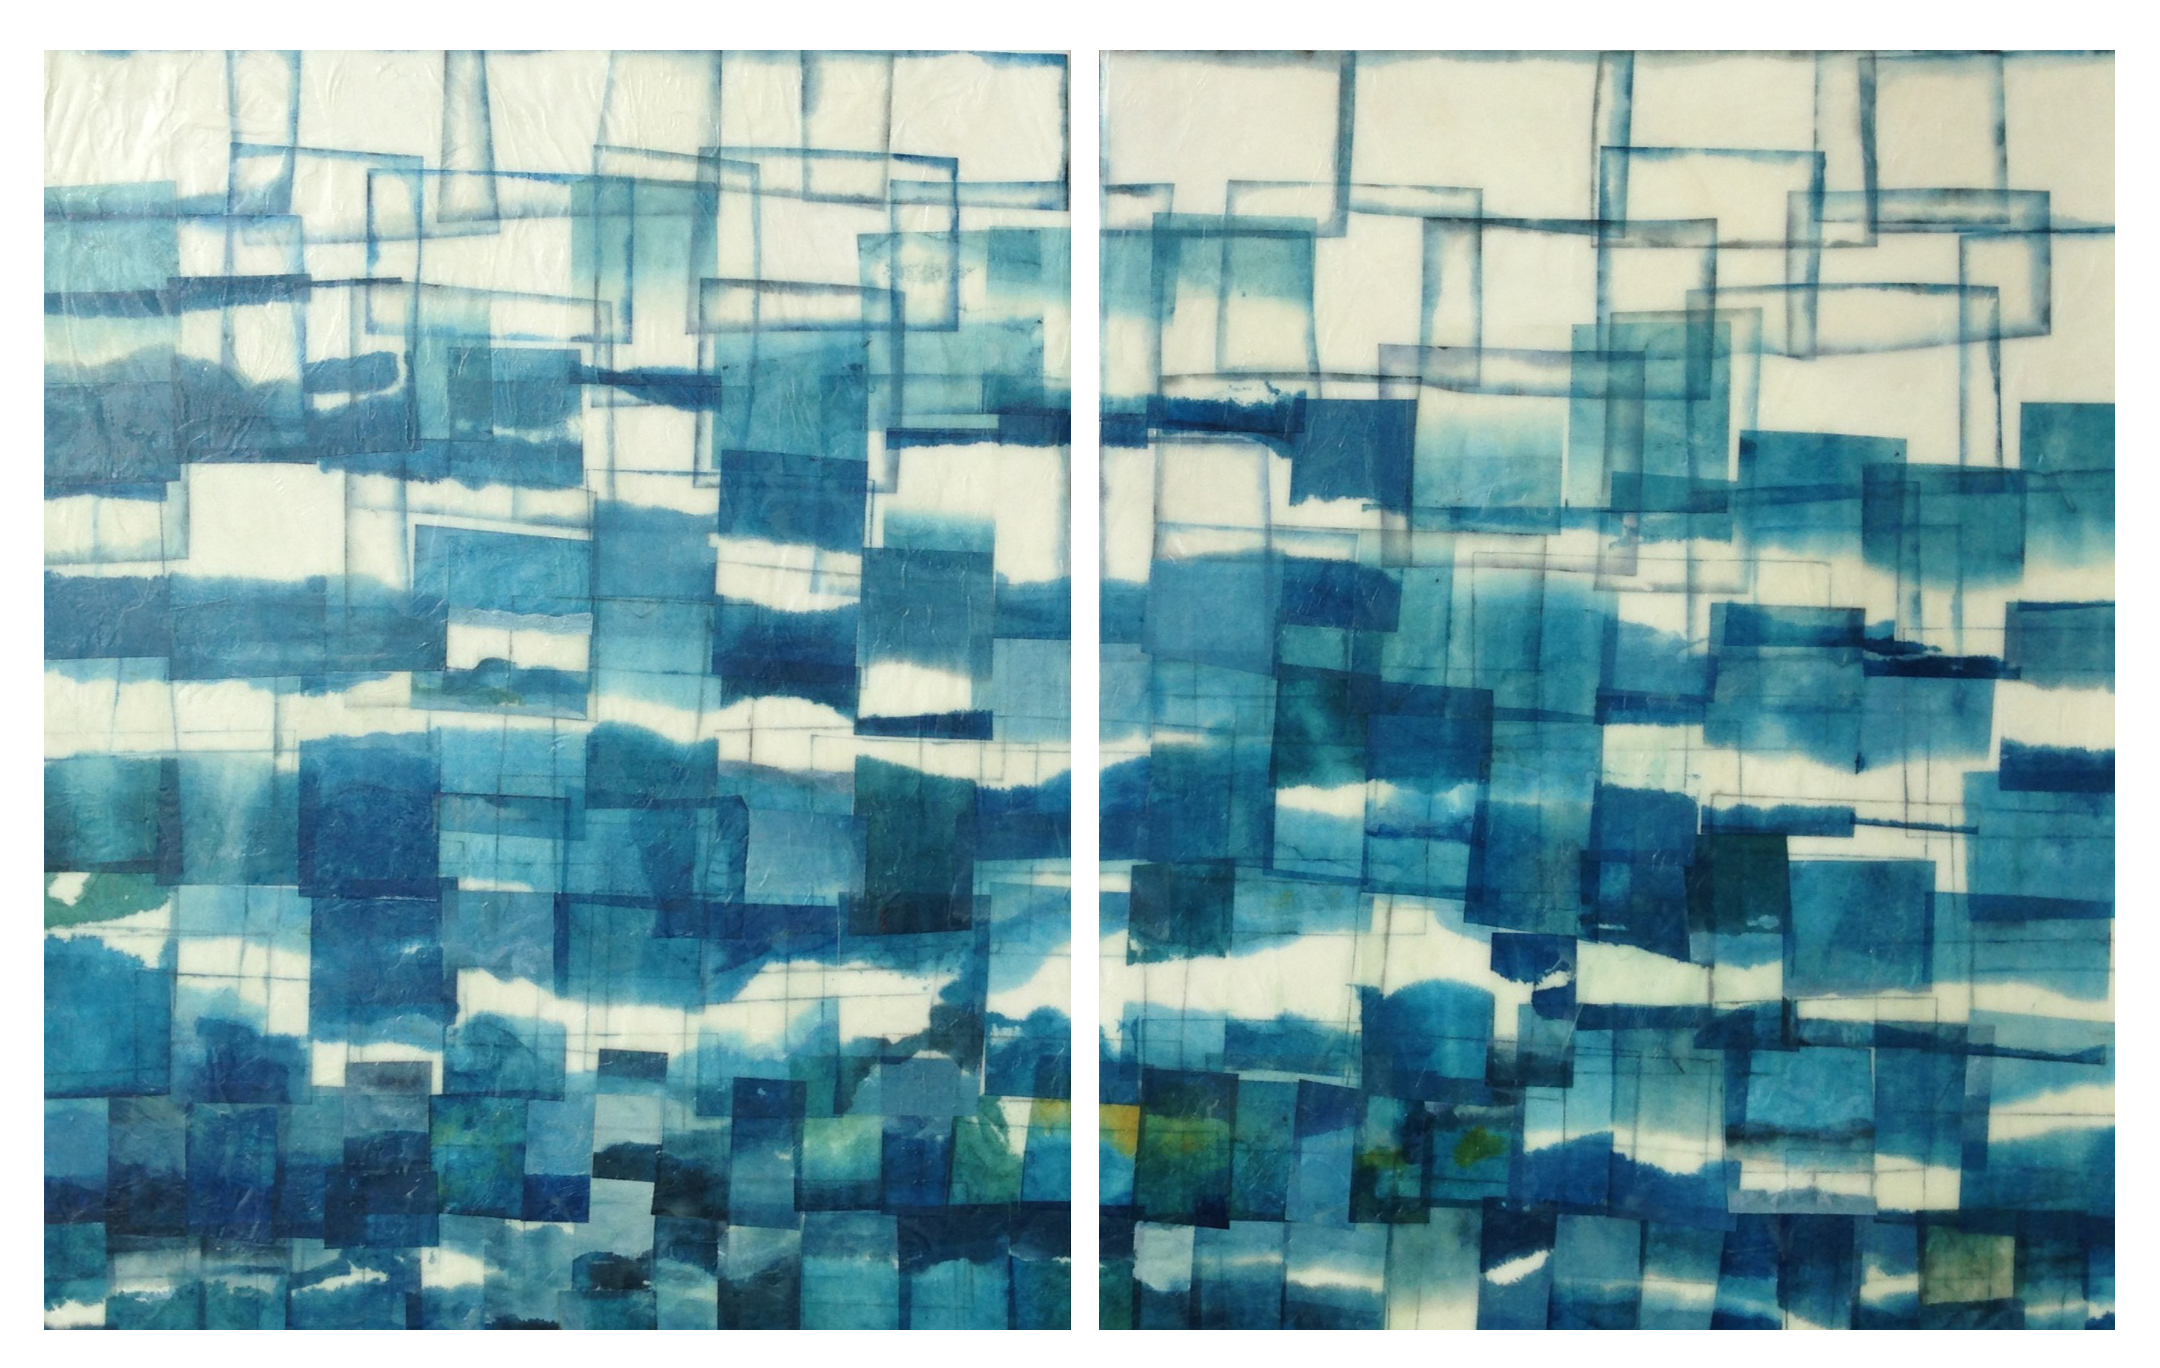  Seascape, 2013 (sold) Encaustic, Mulberry paper, watercolor 24 x 52&nbsp;x 1 inches  The ocean is never far from my mind and is a constant source of inspiration. I often attempt to capture the ever-changing luminosity and movement of the ocean’s sur